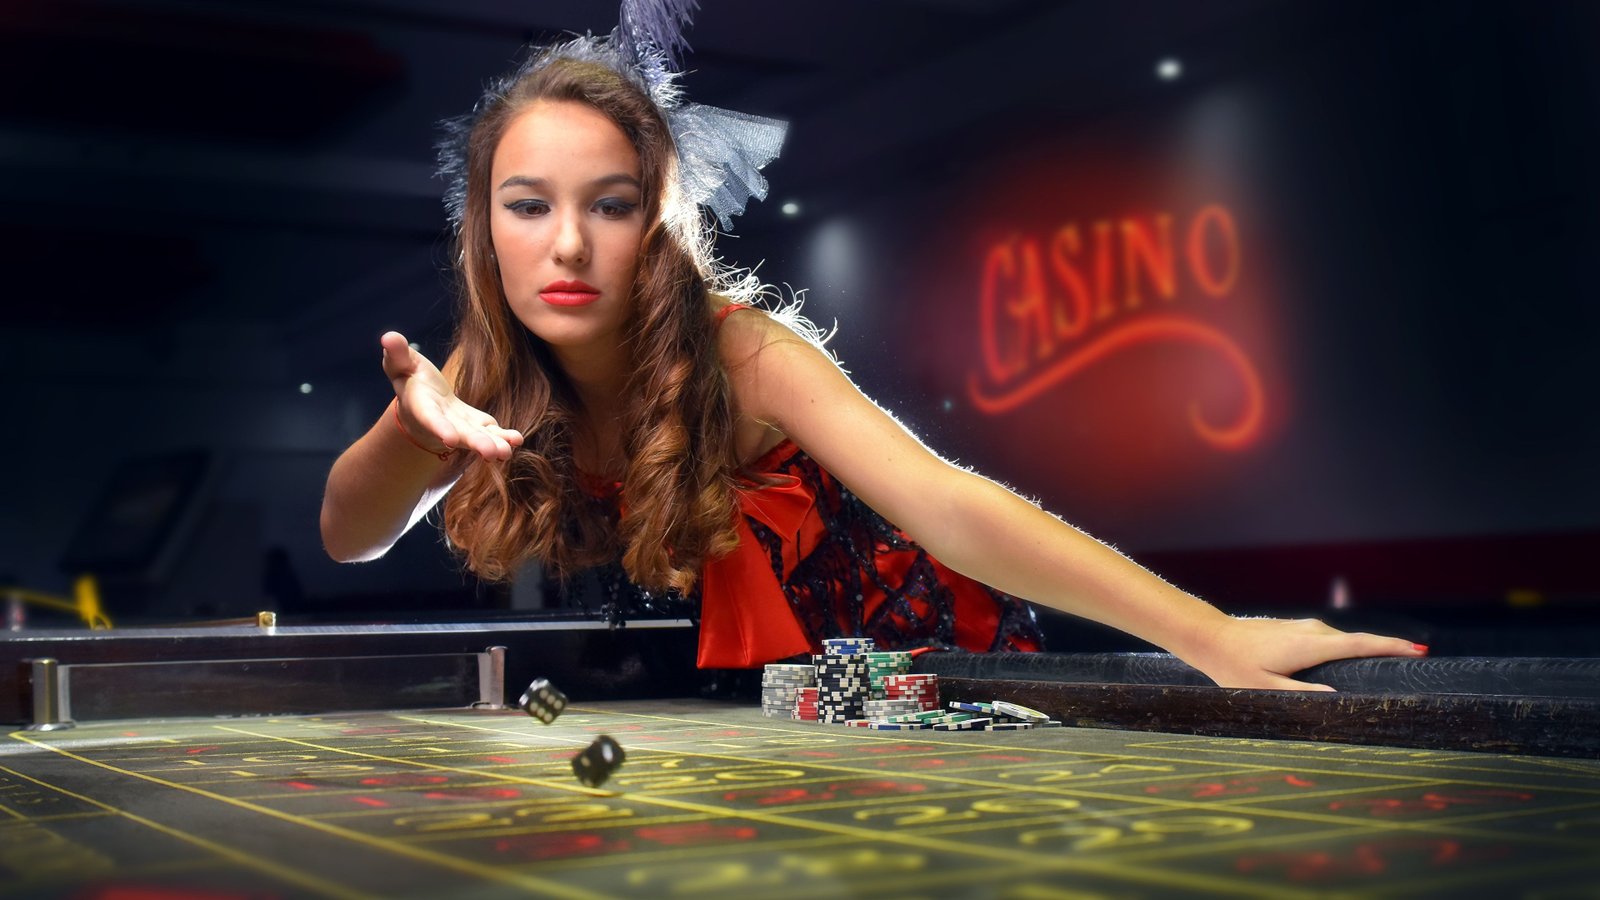 Amazing Tips for choosing the Best Online Casino to Place Your Bets